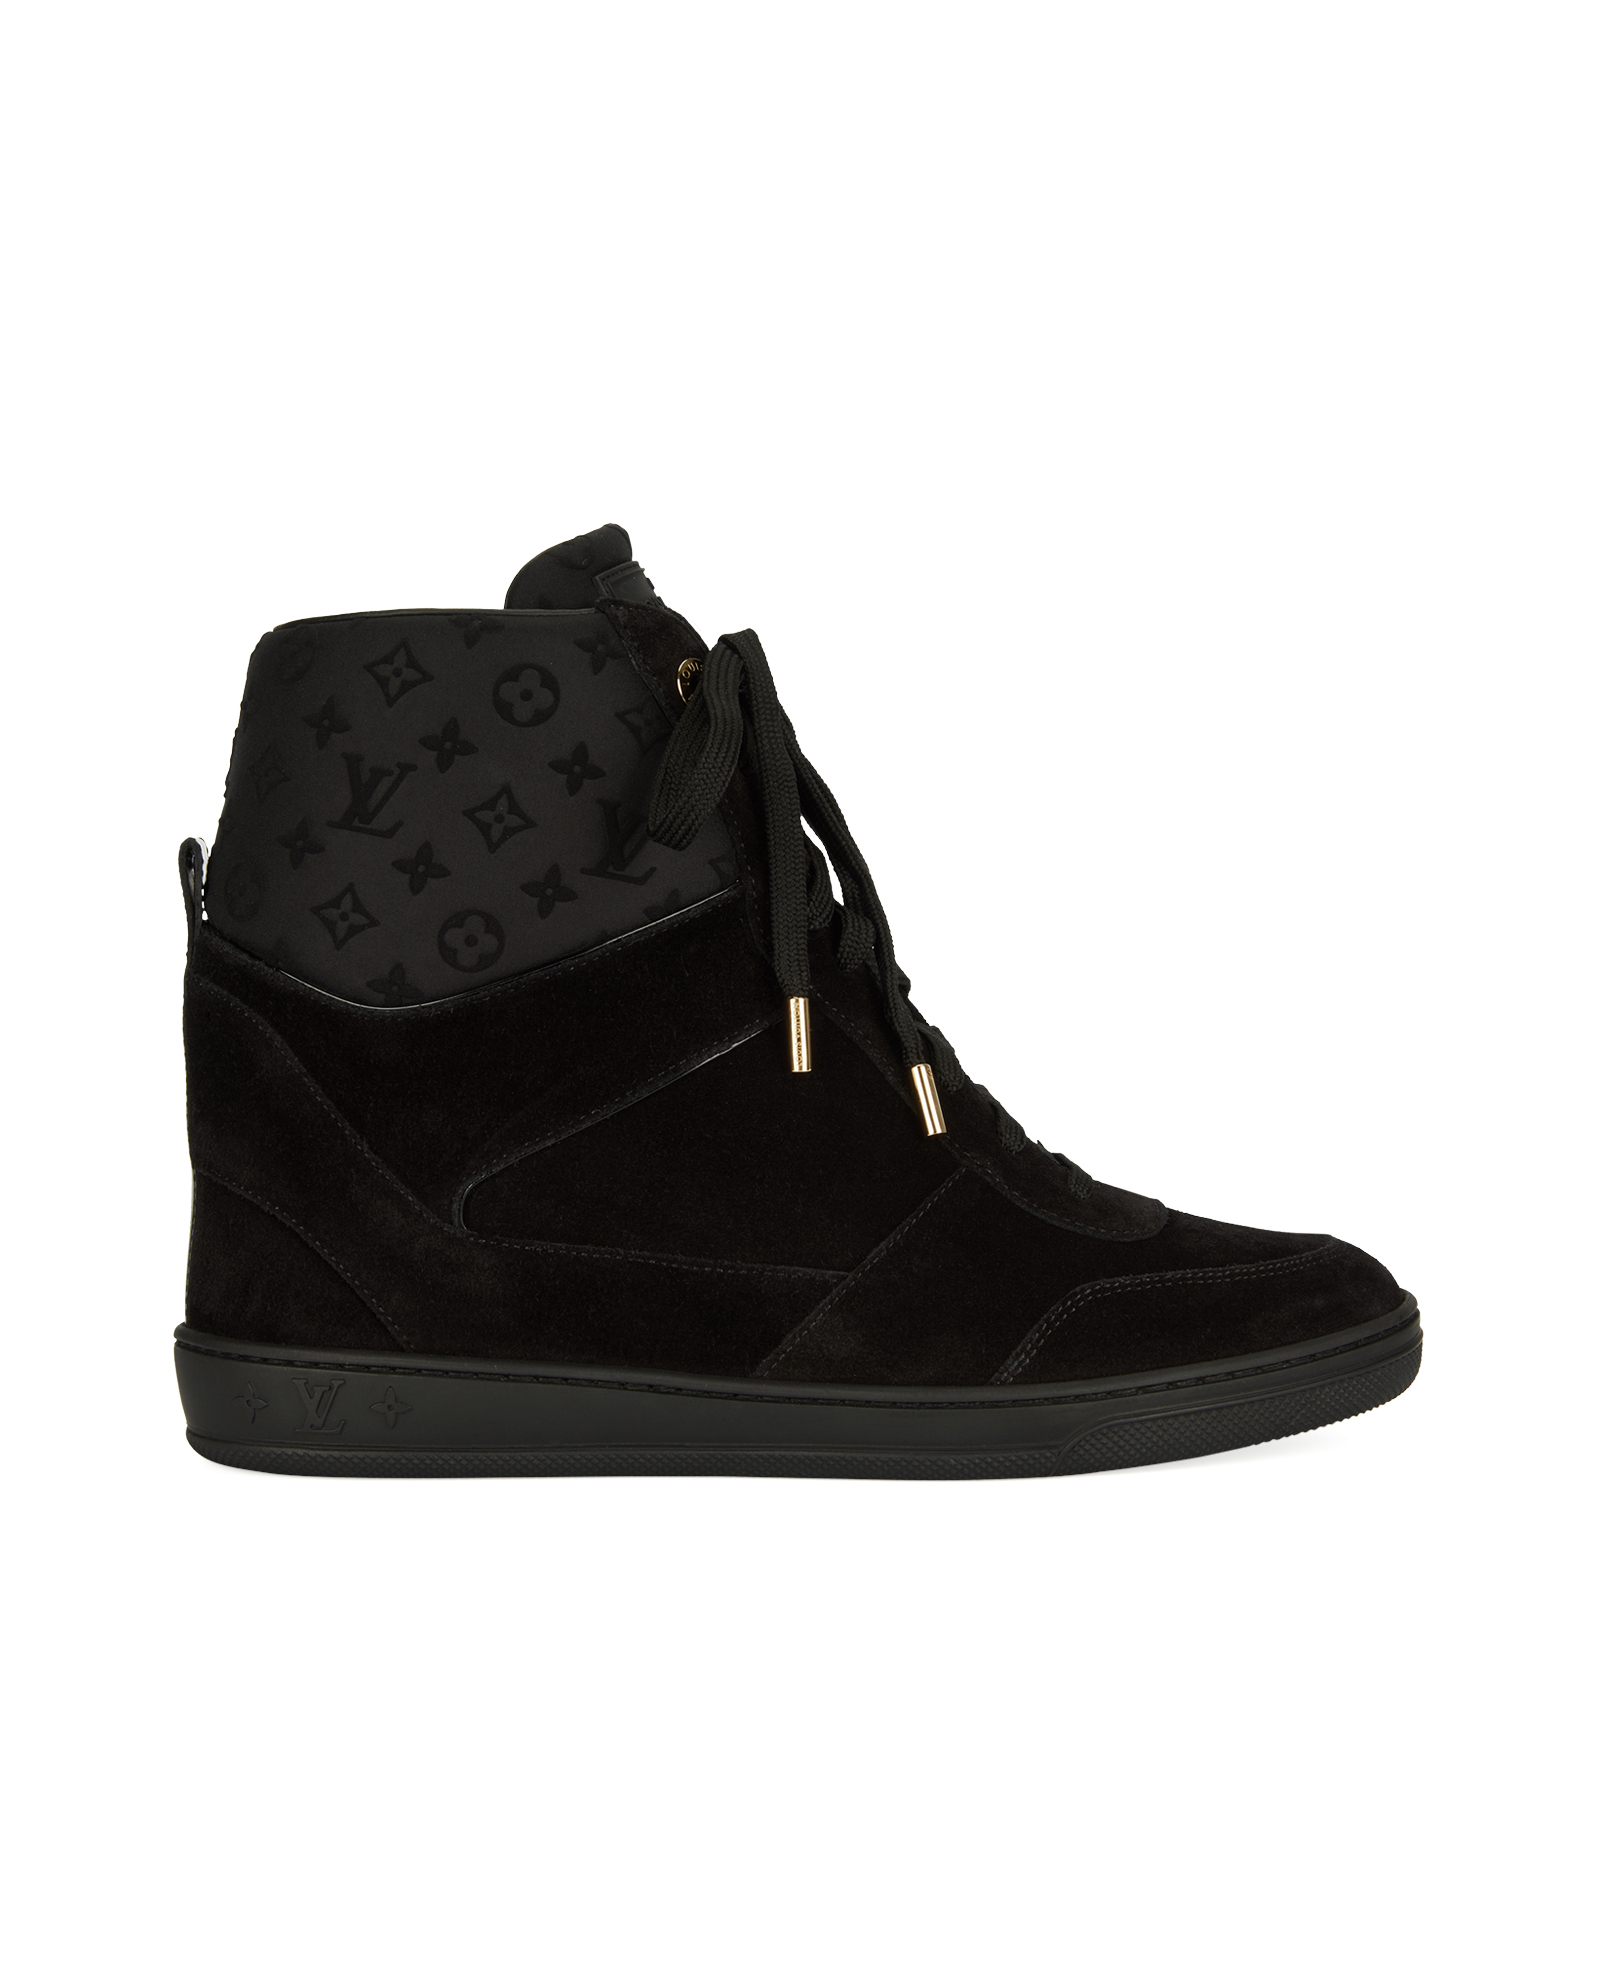 Louis Vuitton Black Leather And Embossed Monogram Suede Millenium Wedge  Sneakers Size 36 Louis Vuitton | The Luxury Closet